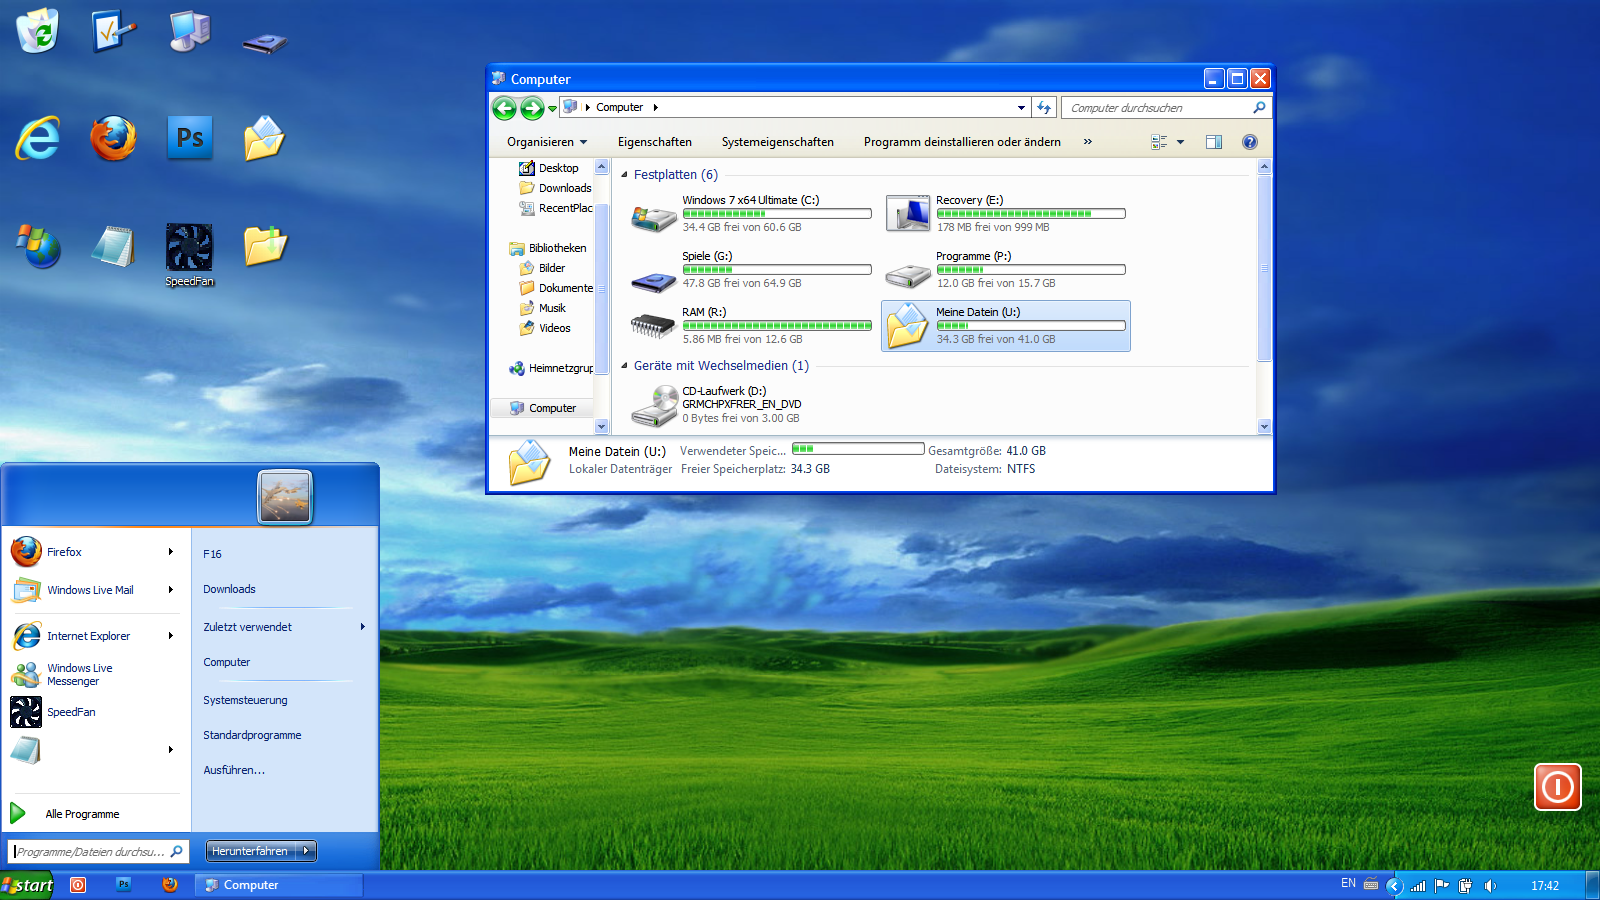 Windows xp theme package by gothago on